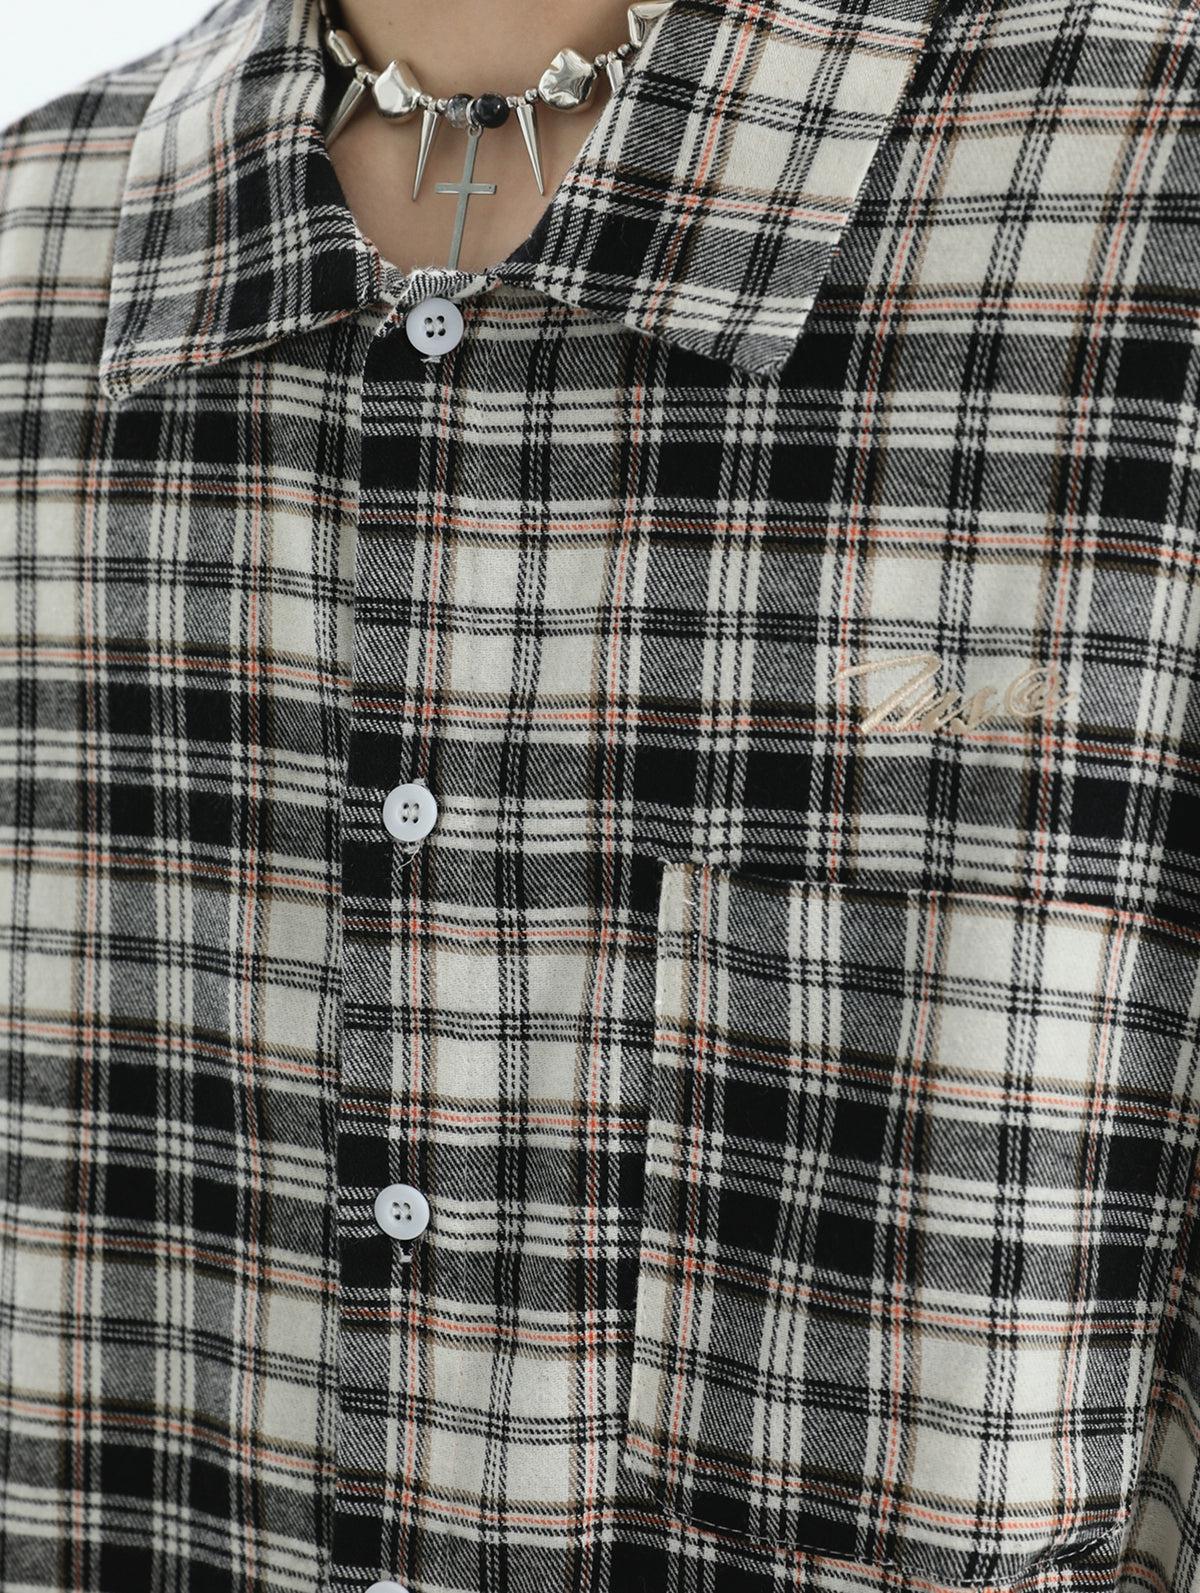 Relaxed Fit Plaid Shirt Korean Street Fashion Shirt By INS Korea Shop Online at OH Vault